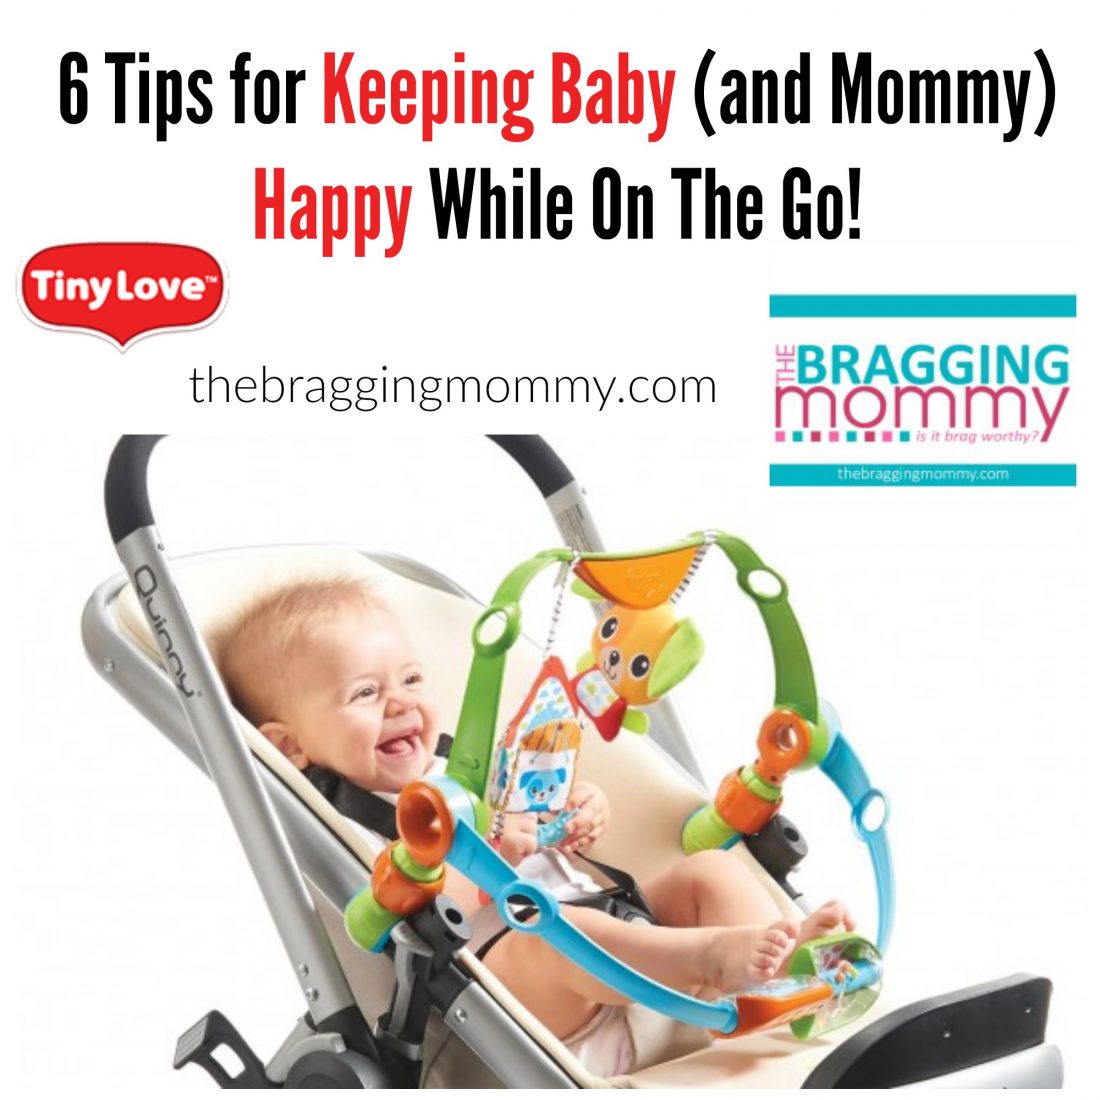 6 tips for keeping baby happy while on the go